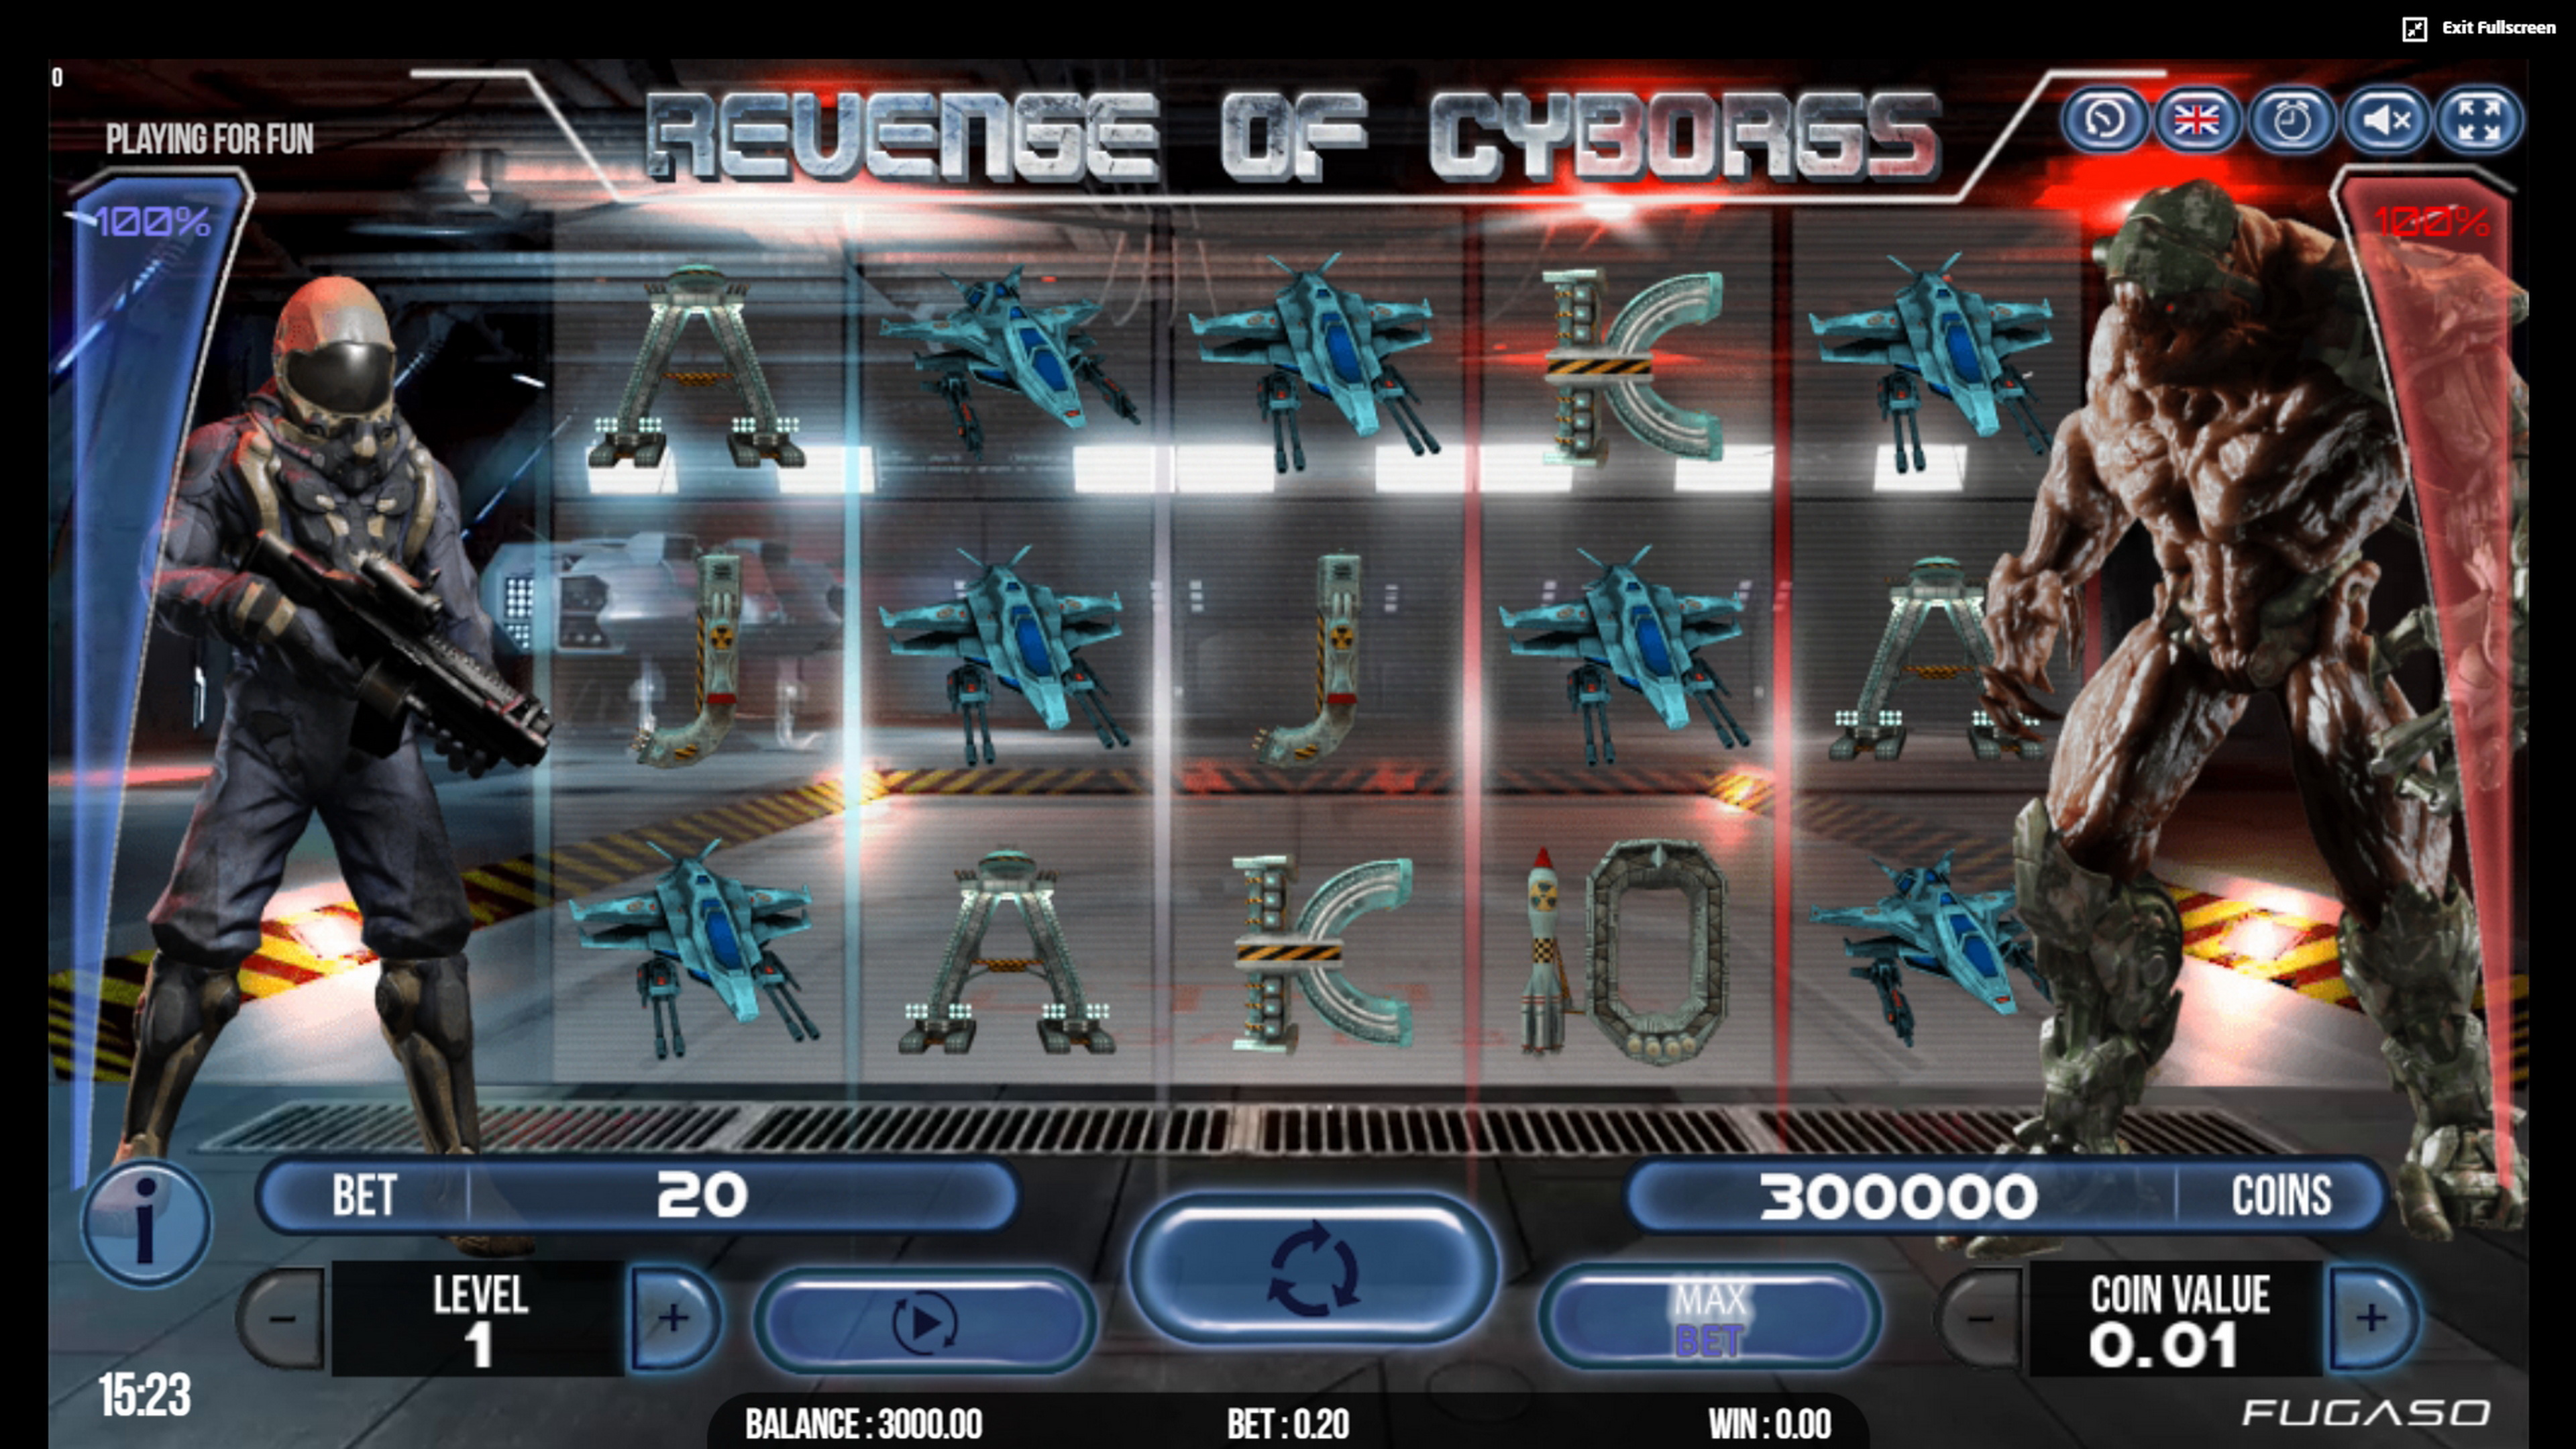 Reels in Revenge of Cyborgs Slot Game by Fugaso